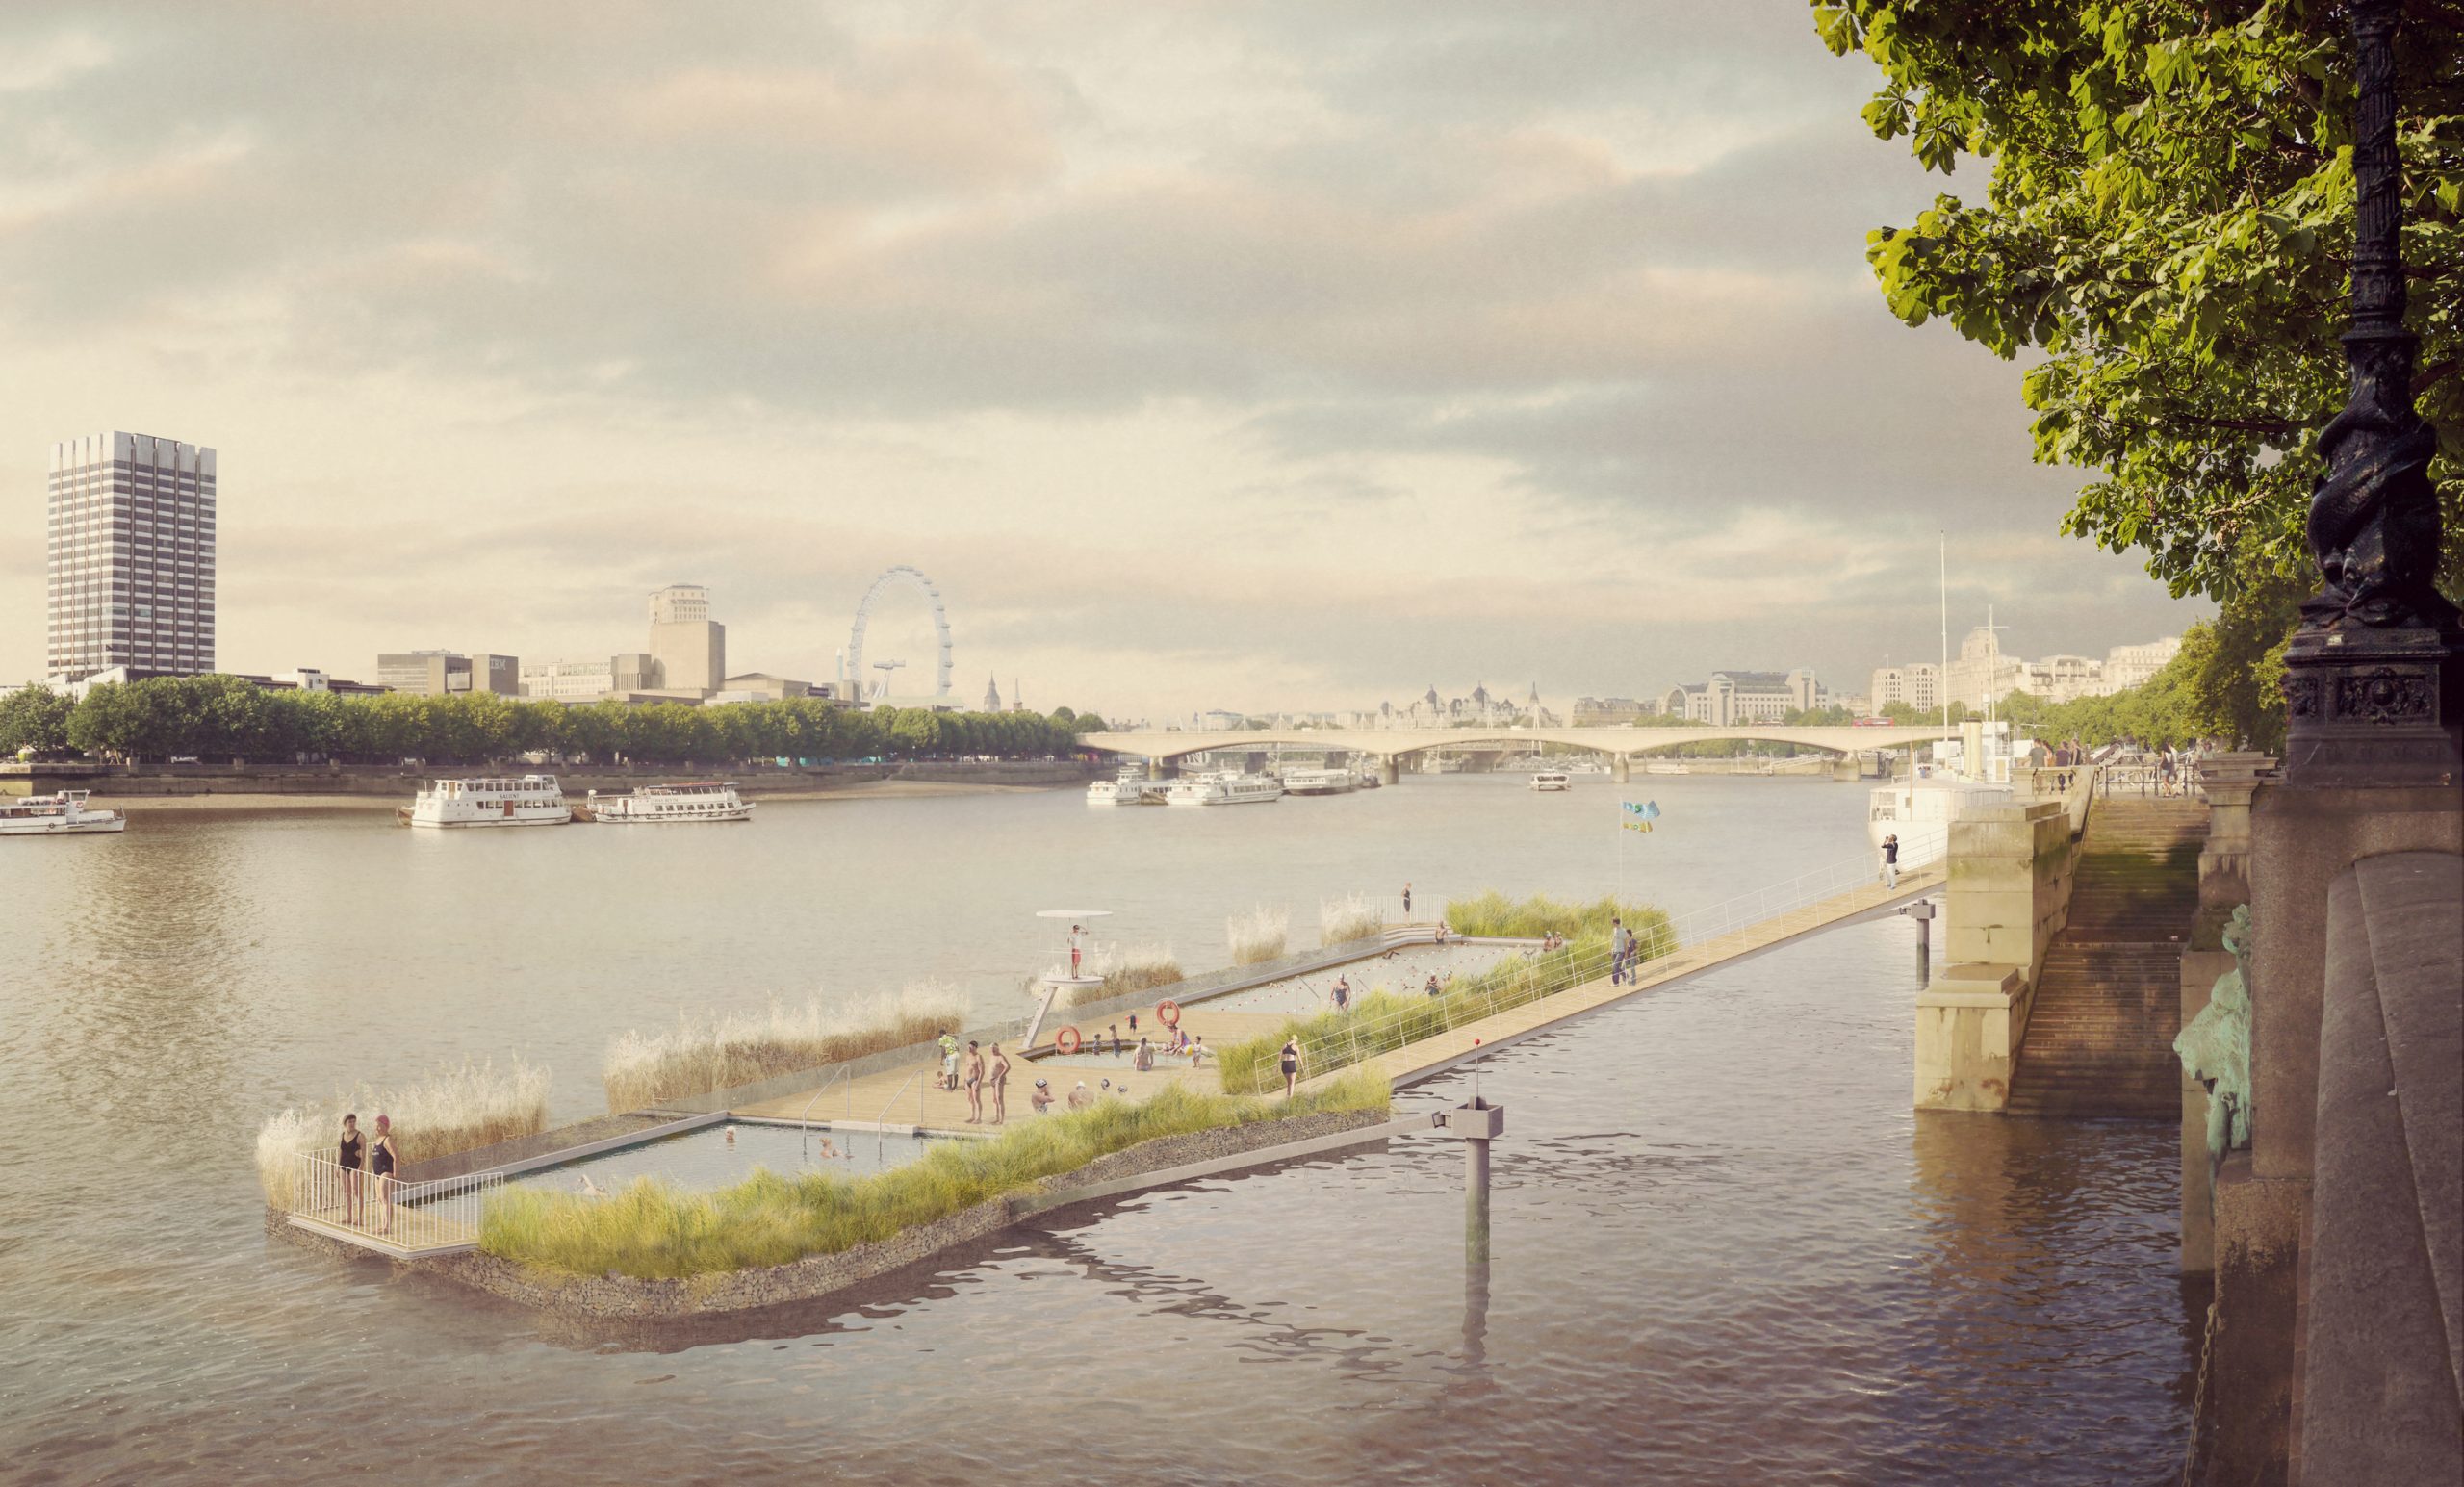 urban-swimmers-want-to-build-a-floating-lido-in-the-river-thames